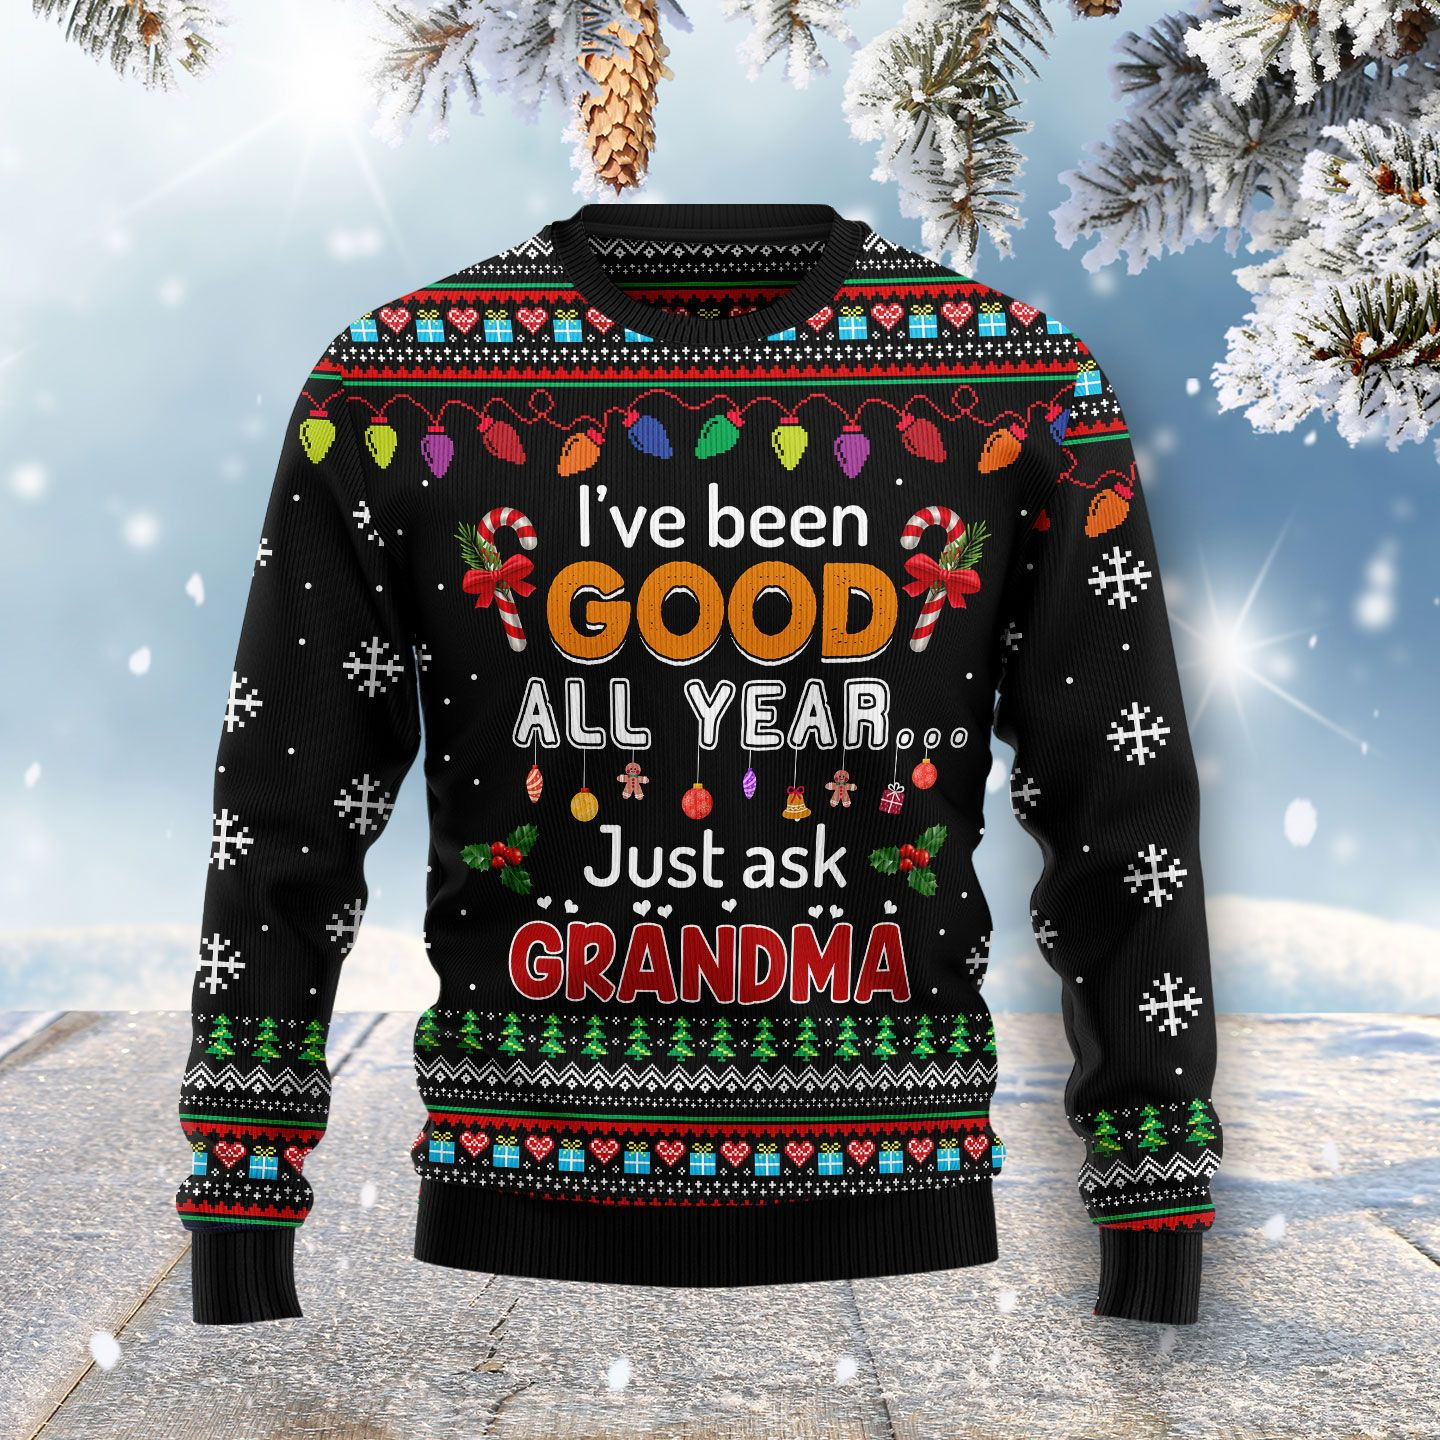 Ive Been Good All Year Just Ask Grandma Ugly Christmas Sweater Ugly Sweater For Men Women